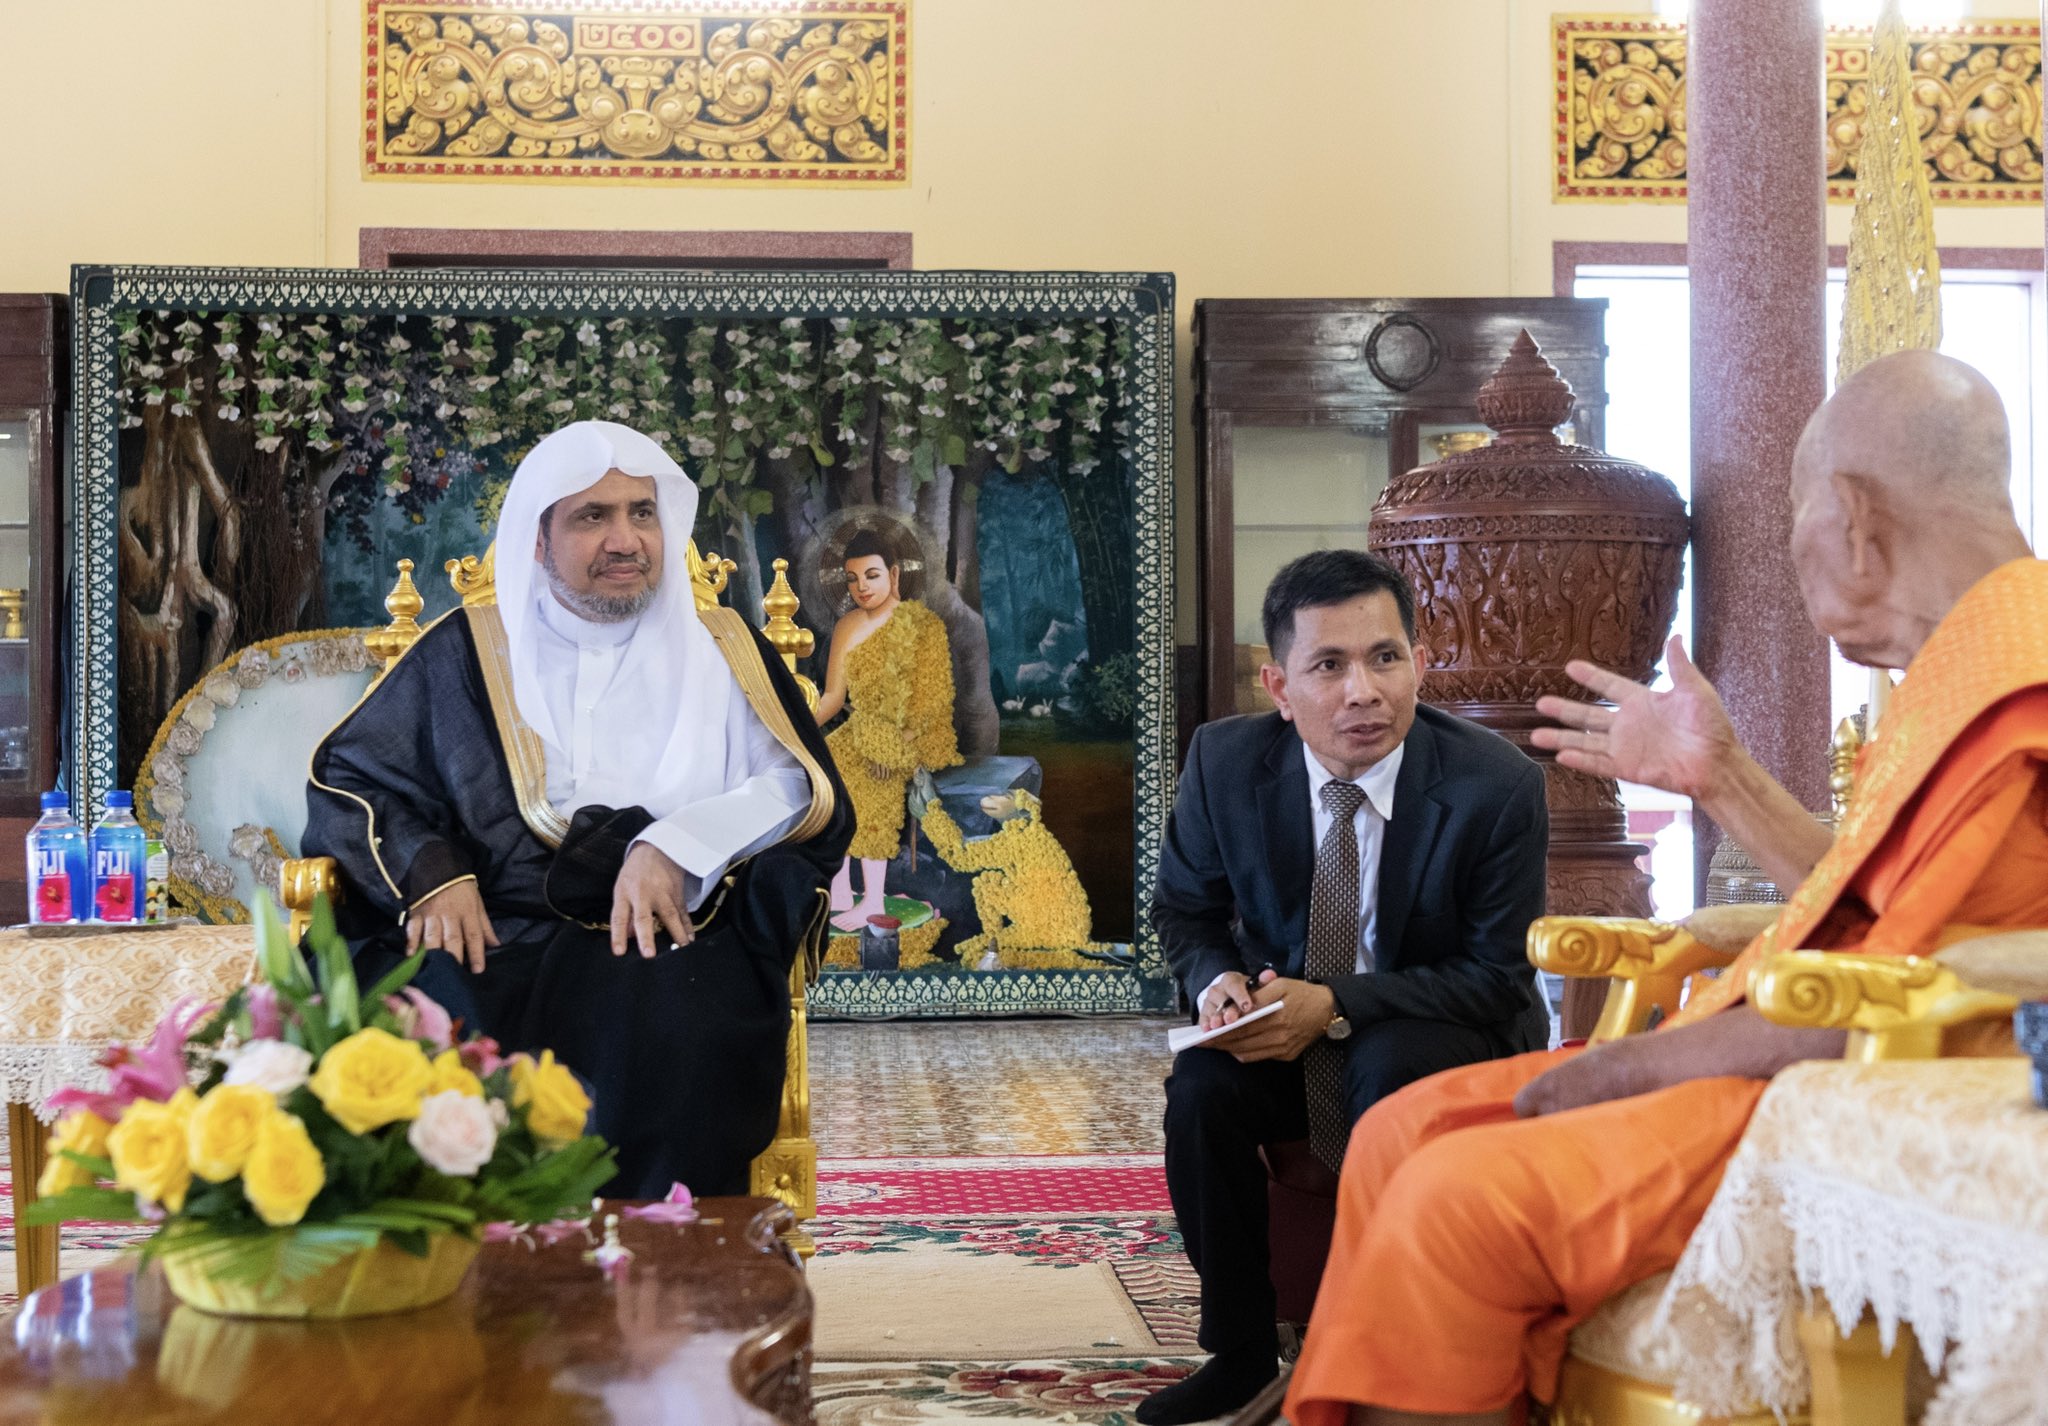 His Excellency Dr. Mohammad Alissa met with the Grand Buddhist Patriarch of the Kingdom of Cambodia, Tep Fong, and Patriarch Bor Kri